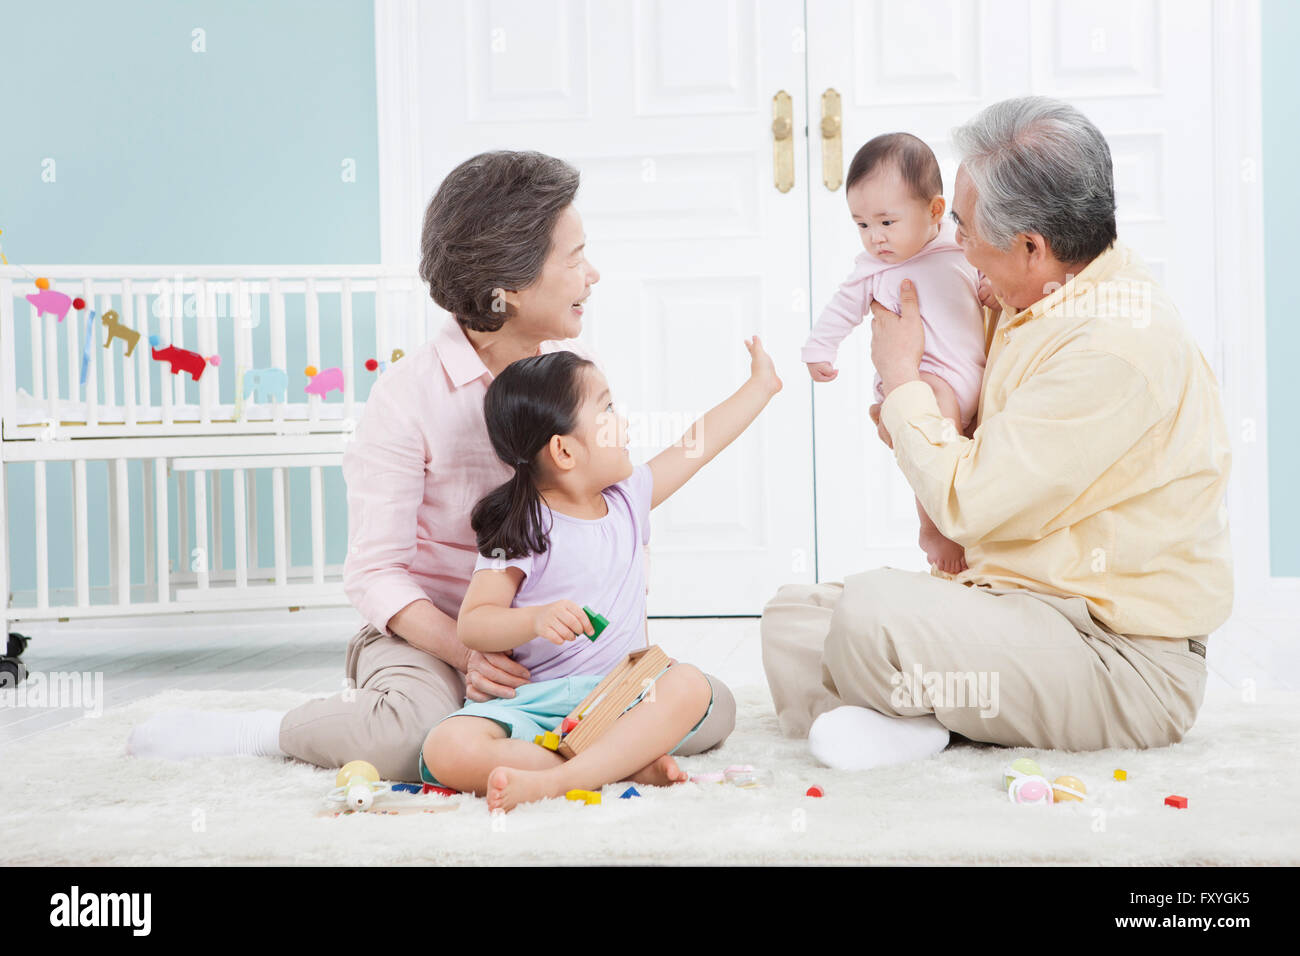 Grandfather holding a baby and grandmother and granddaughter looking at the baby all seated on the floor Stock Photo